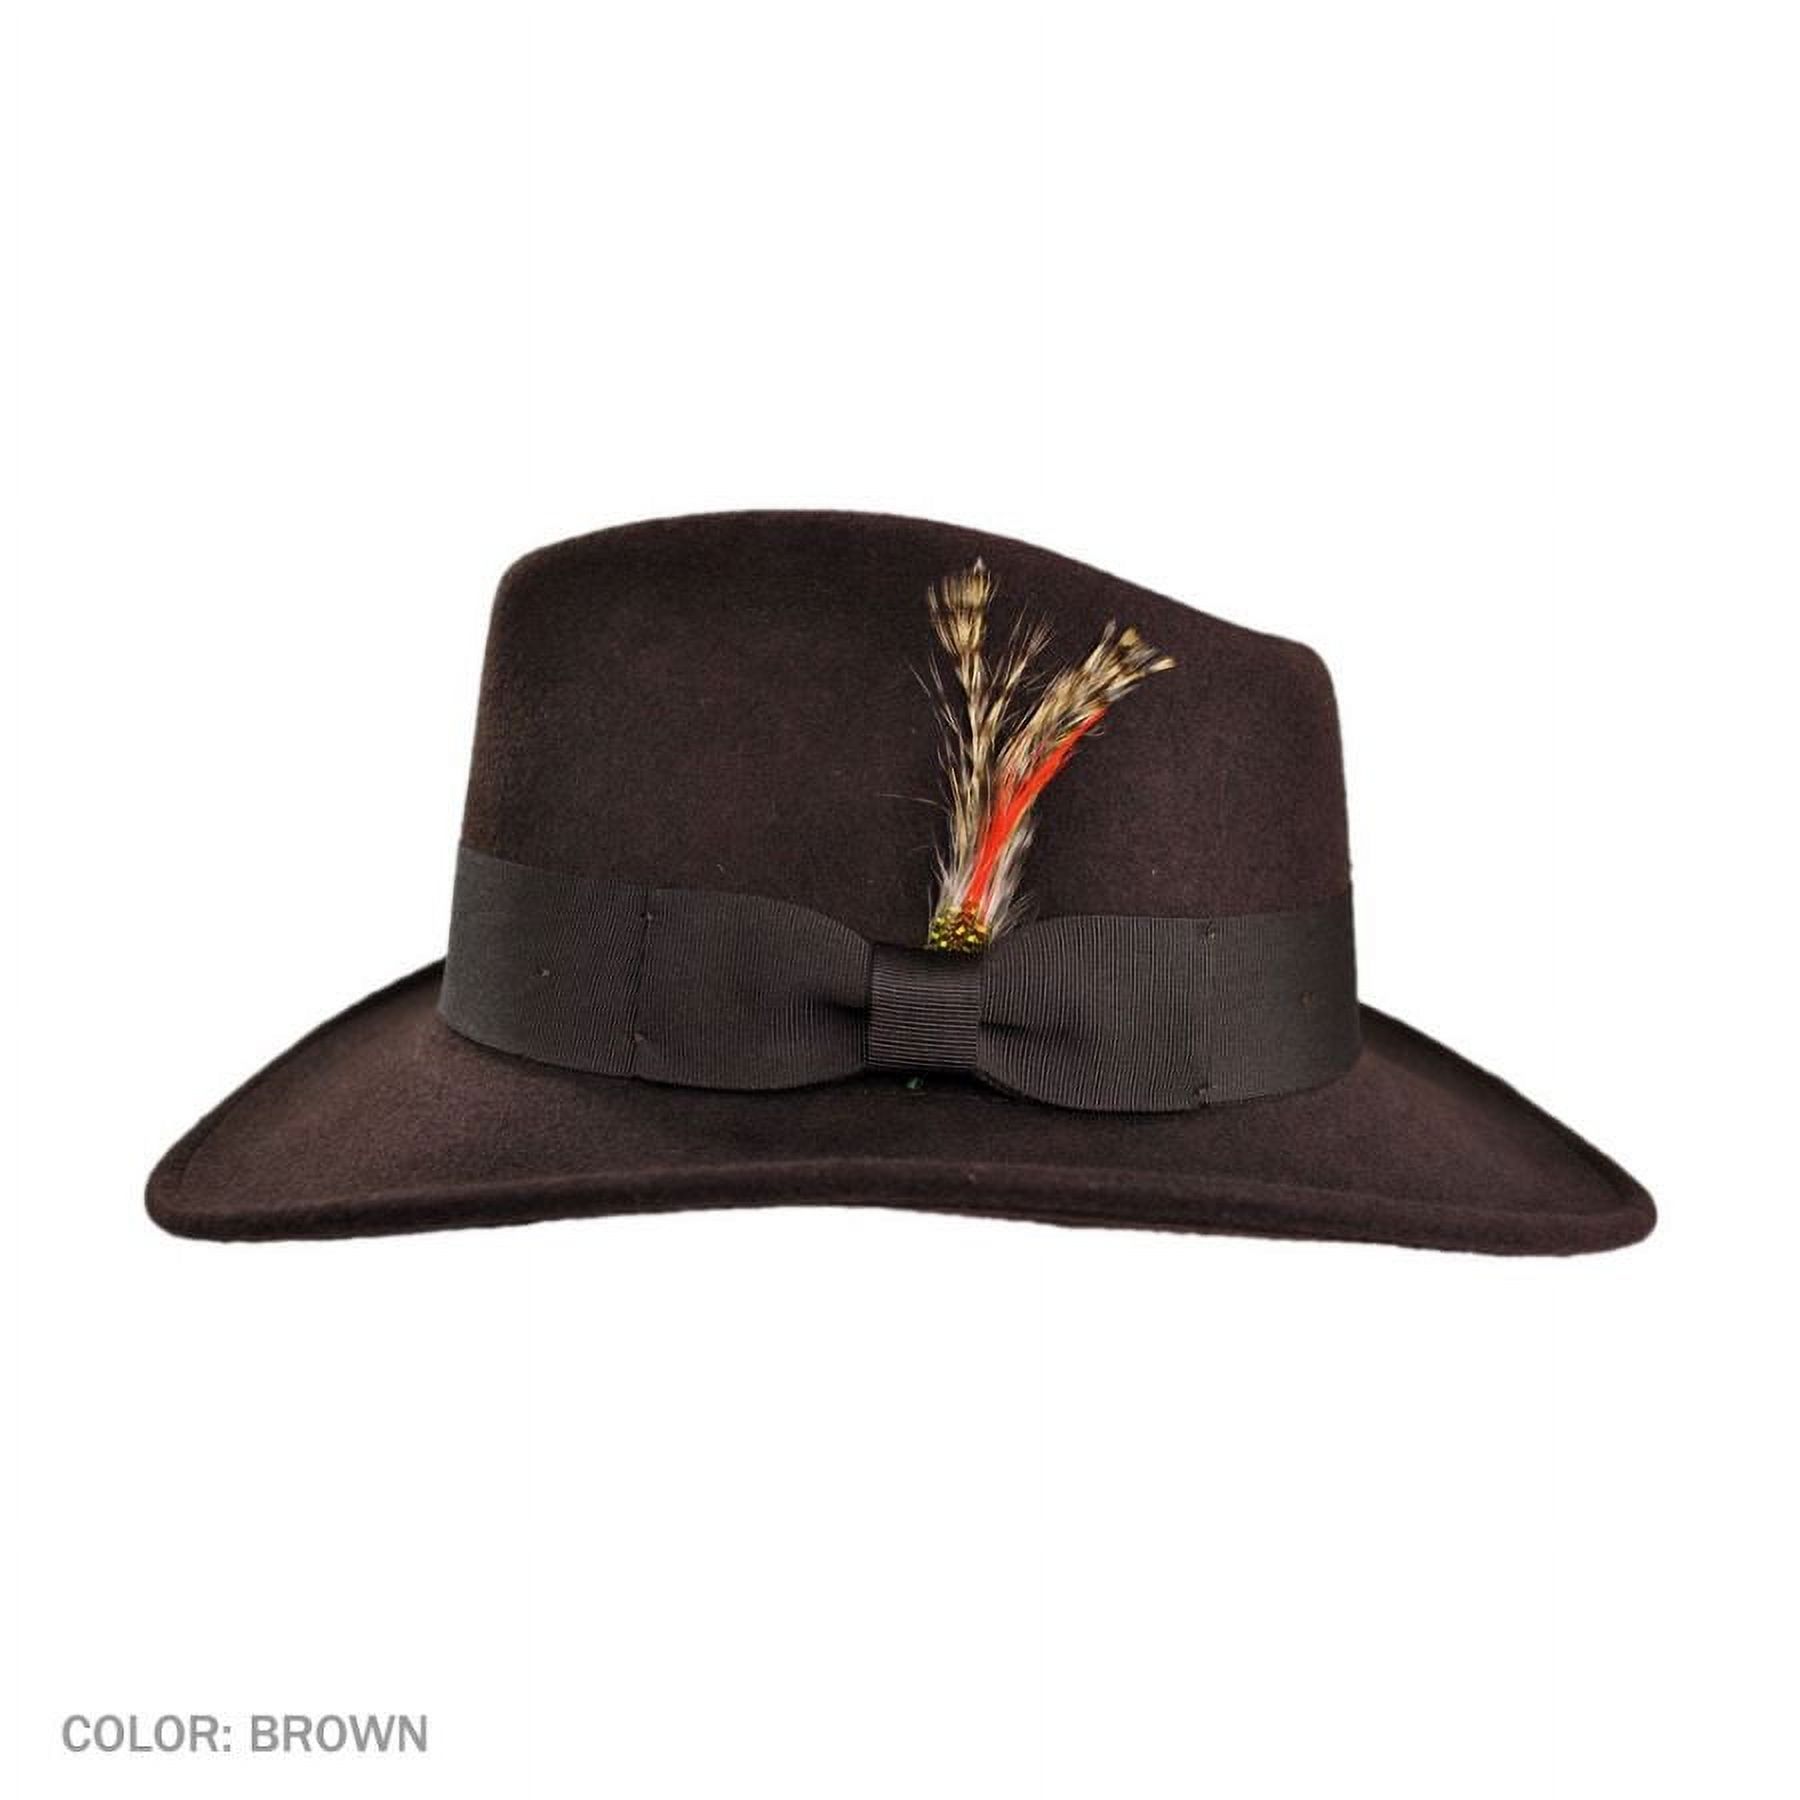 Ford Crushable Wool Felt Fedora Hat - S - Brown - image 5 of 7